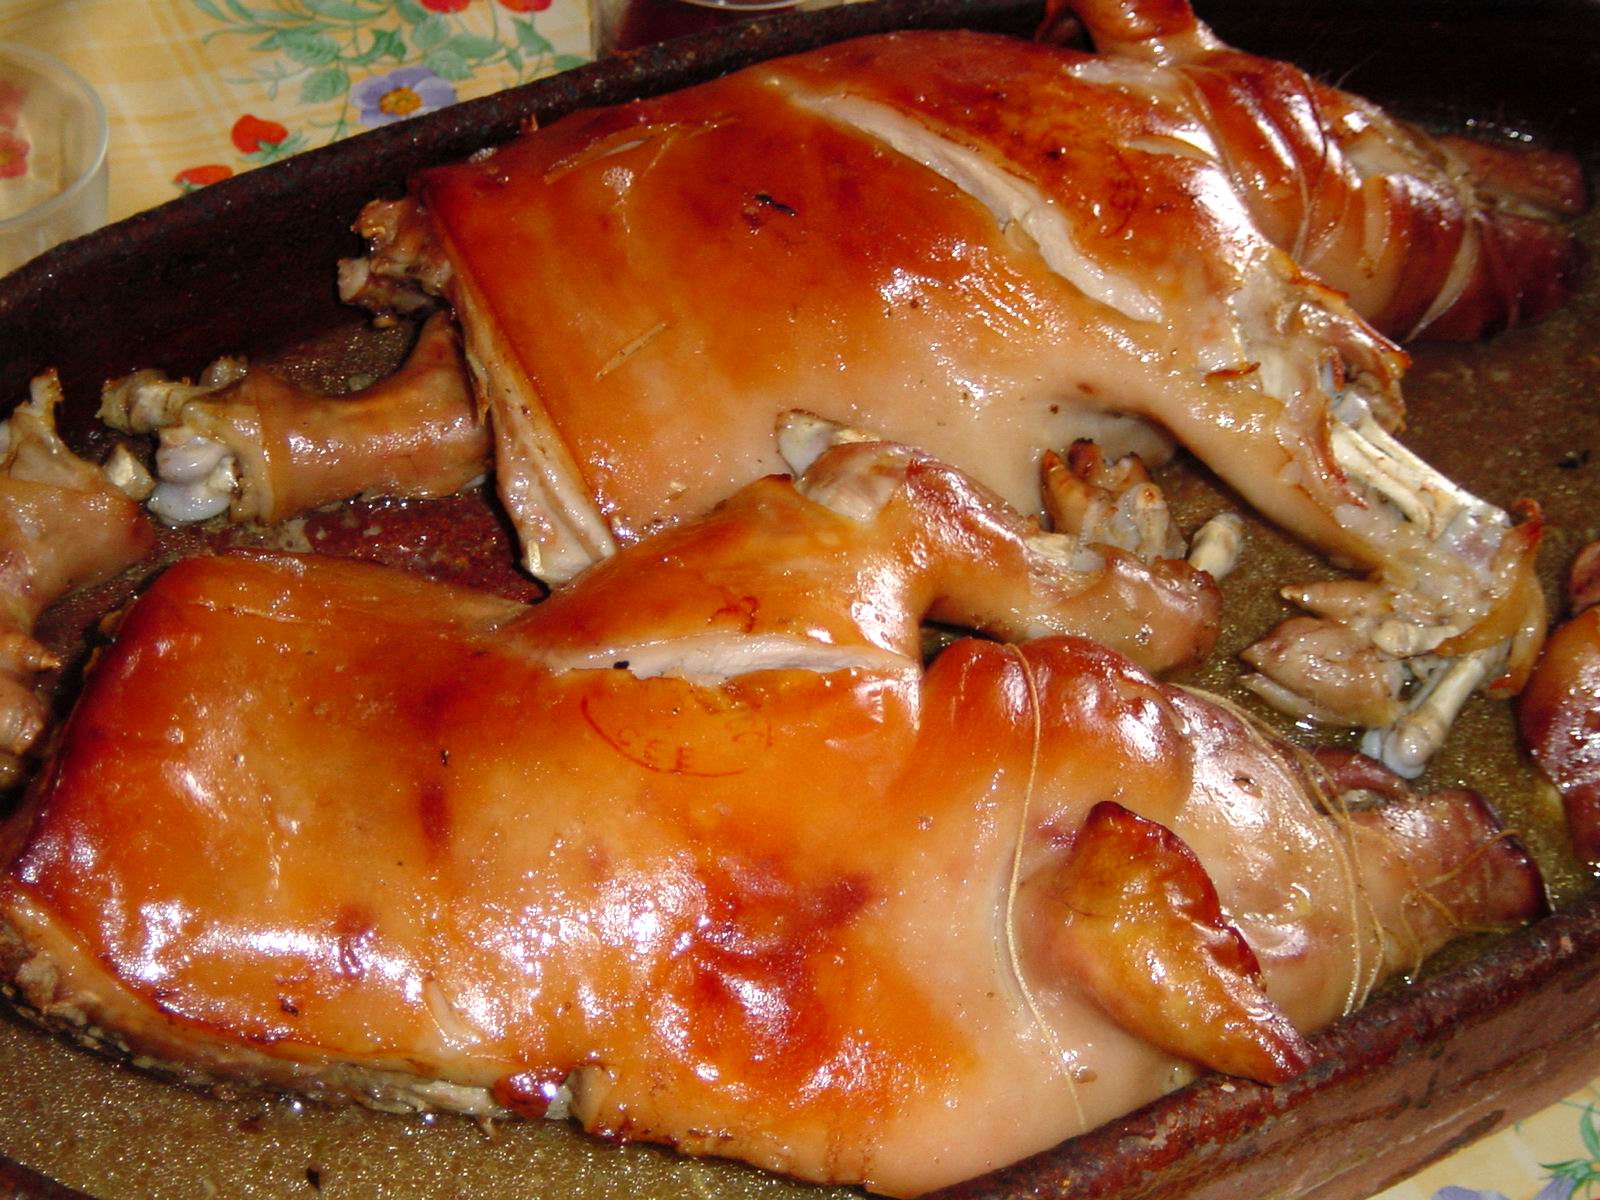 a close up view of some meat cooking in the oven